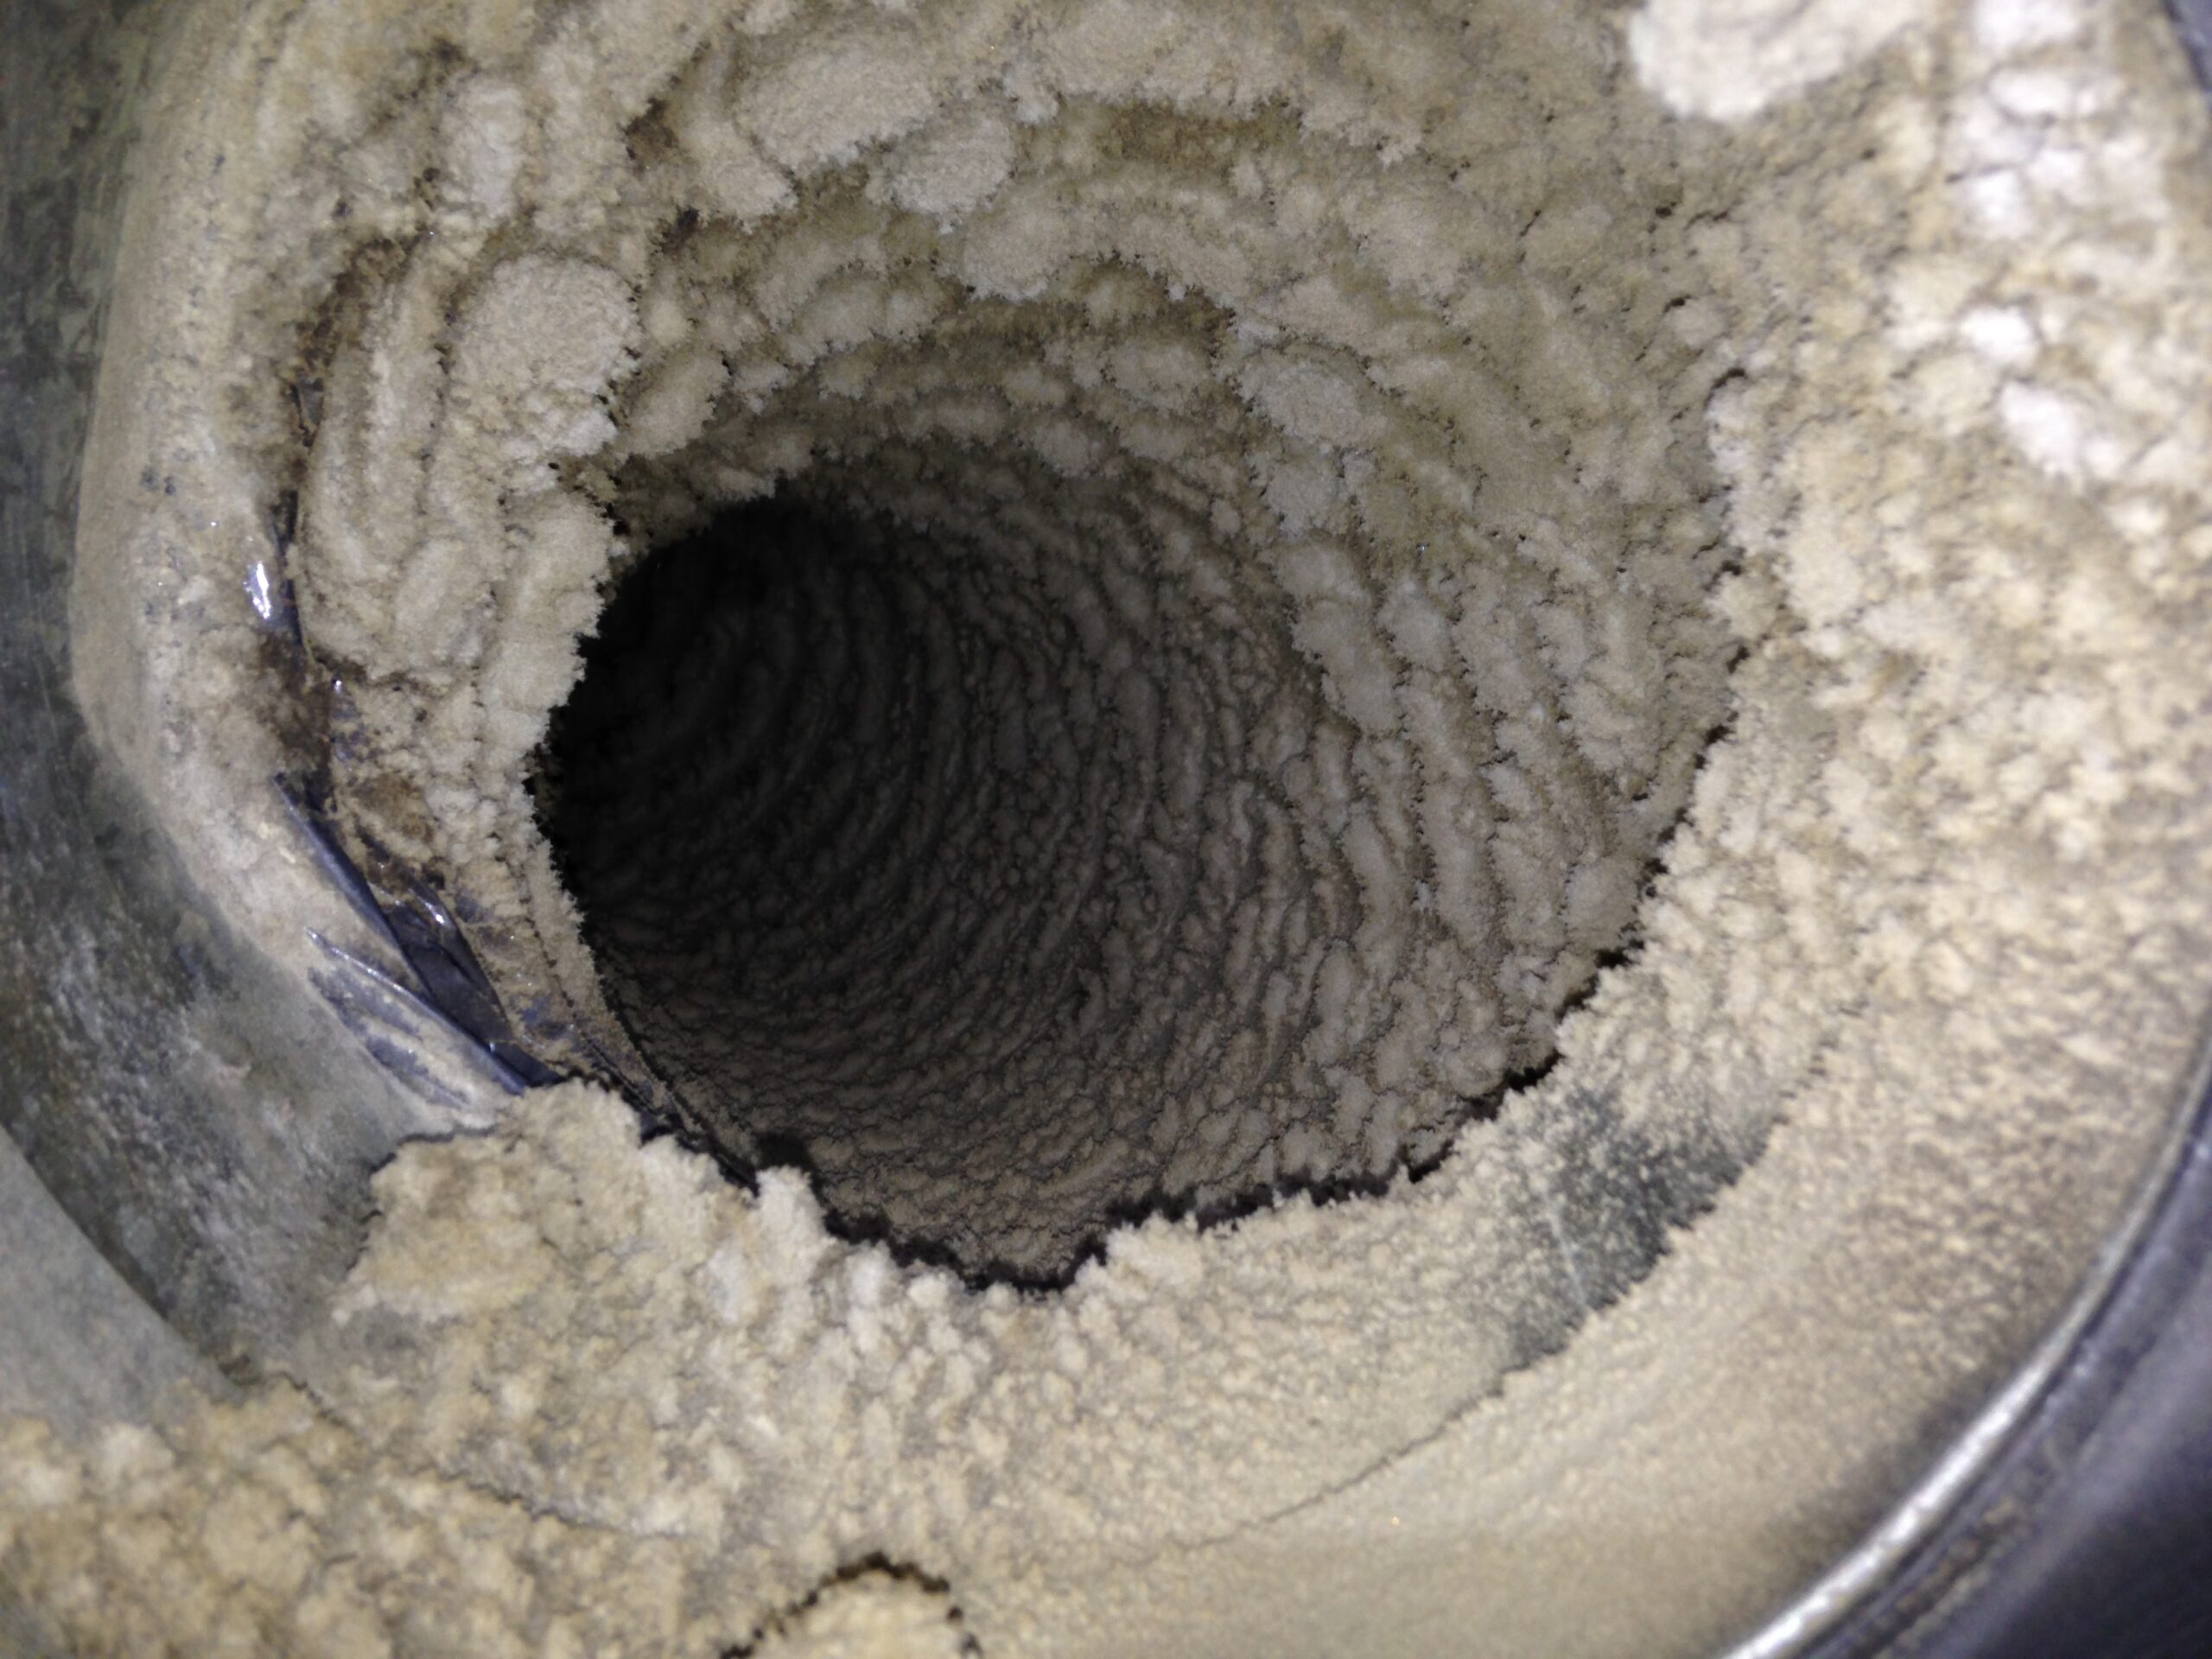 A/C flex ducting before they have been cleaned by A-1 Duct Cleaning & Chimney Sweep in Orange County, CA